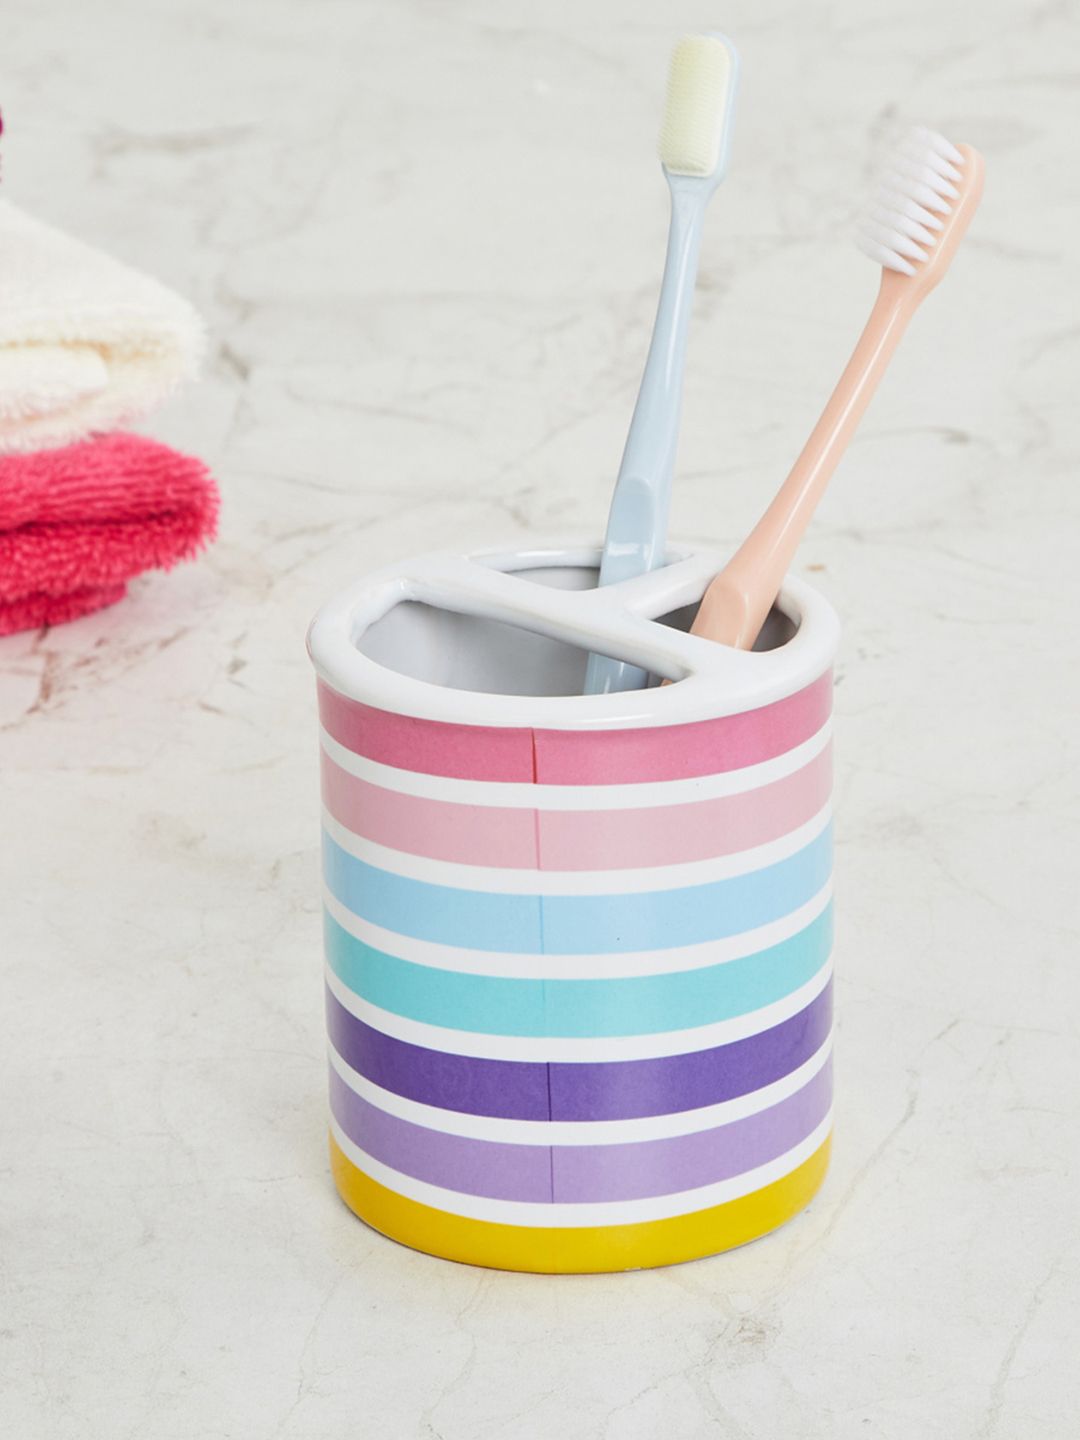 Home Centre White & Blue Striped Ceramic Toothbrush Holder Price in India